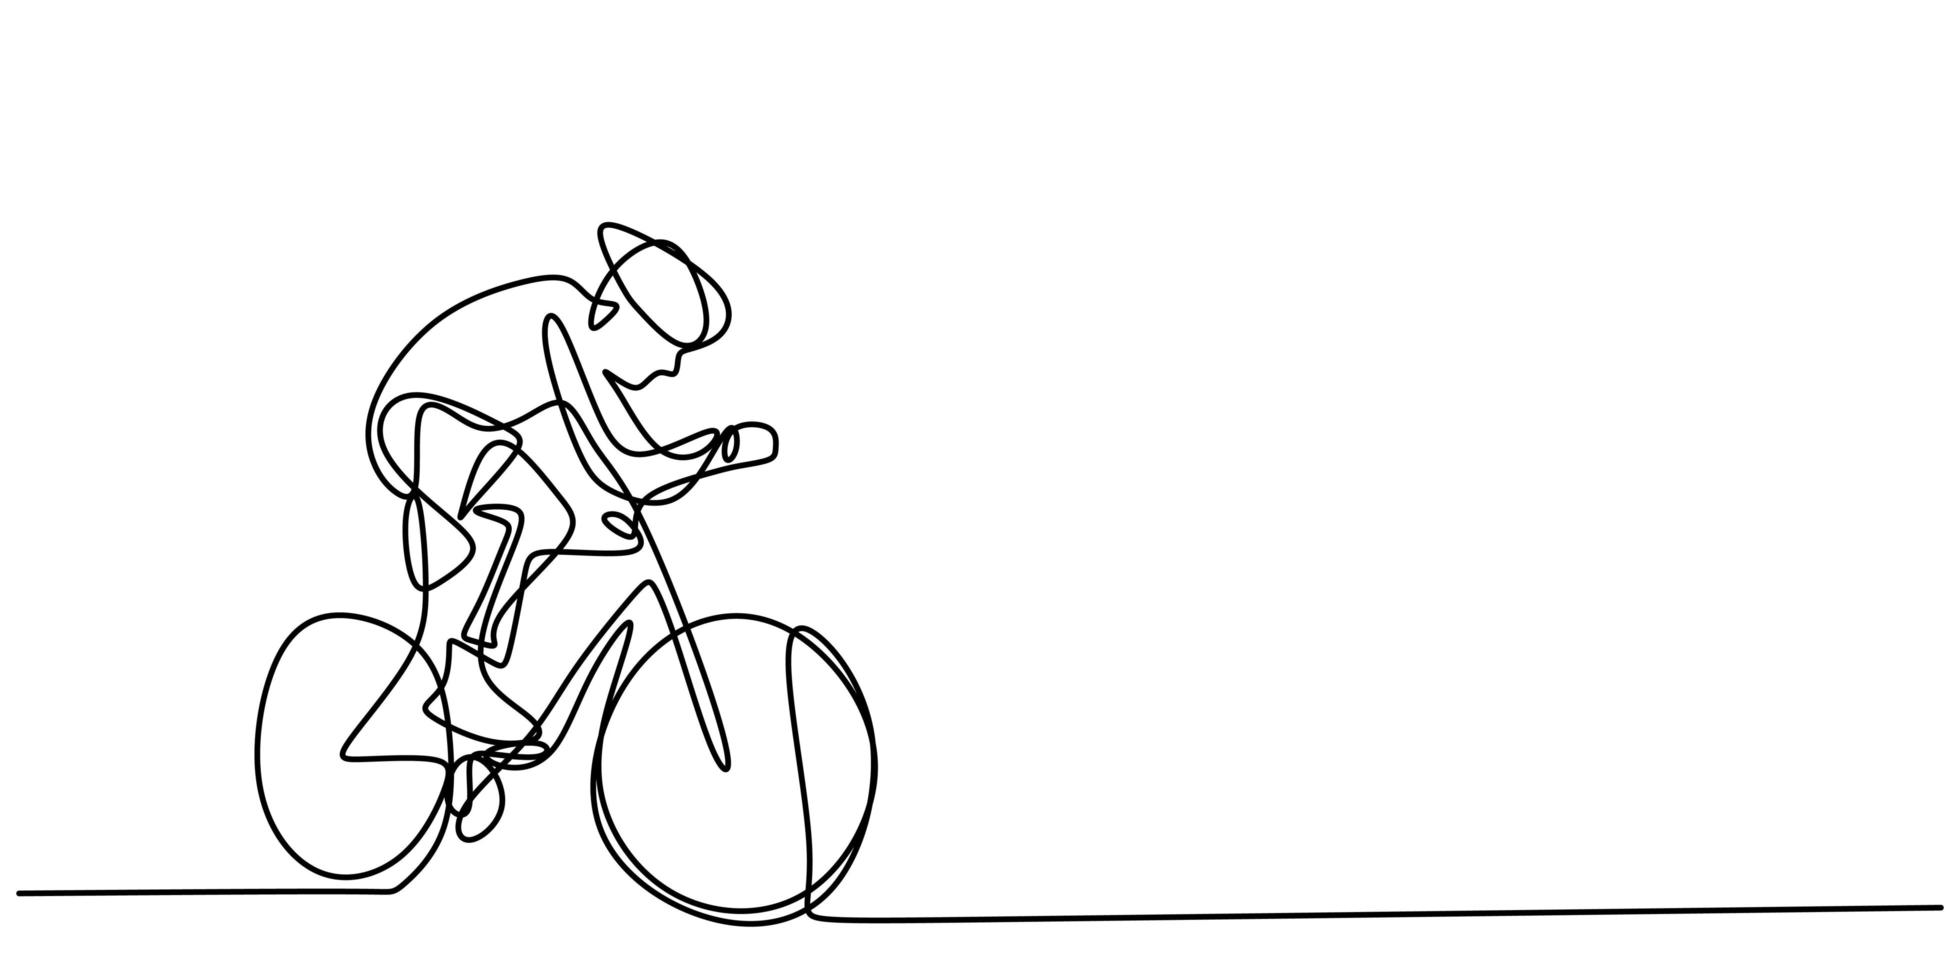 Continuous one line cyclist rider on bicycle. Men's fitness sports athletes ride bicycles. vector